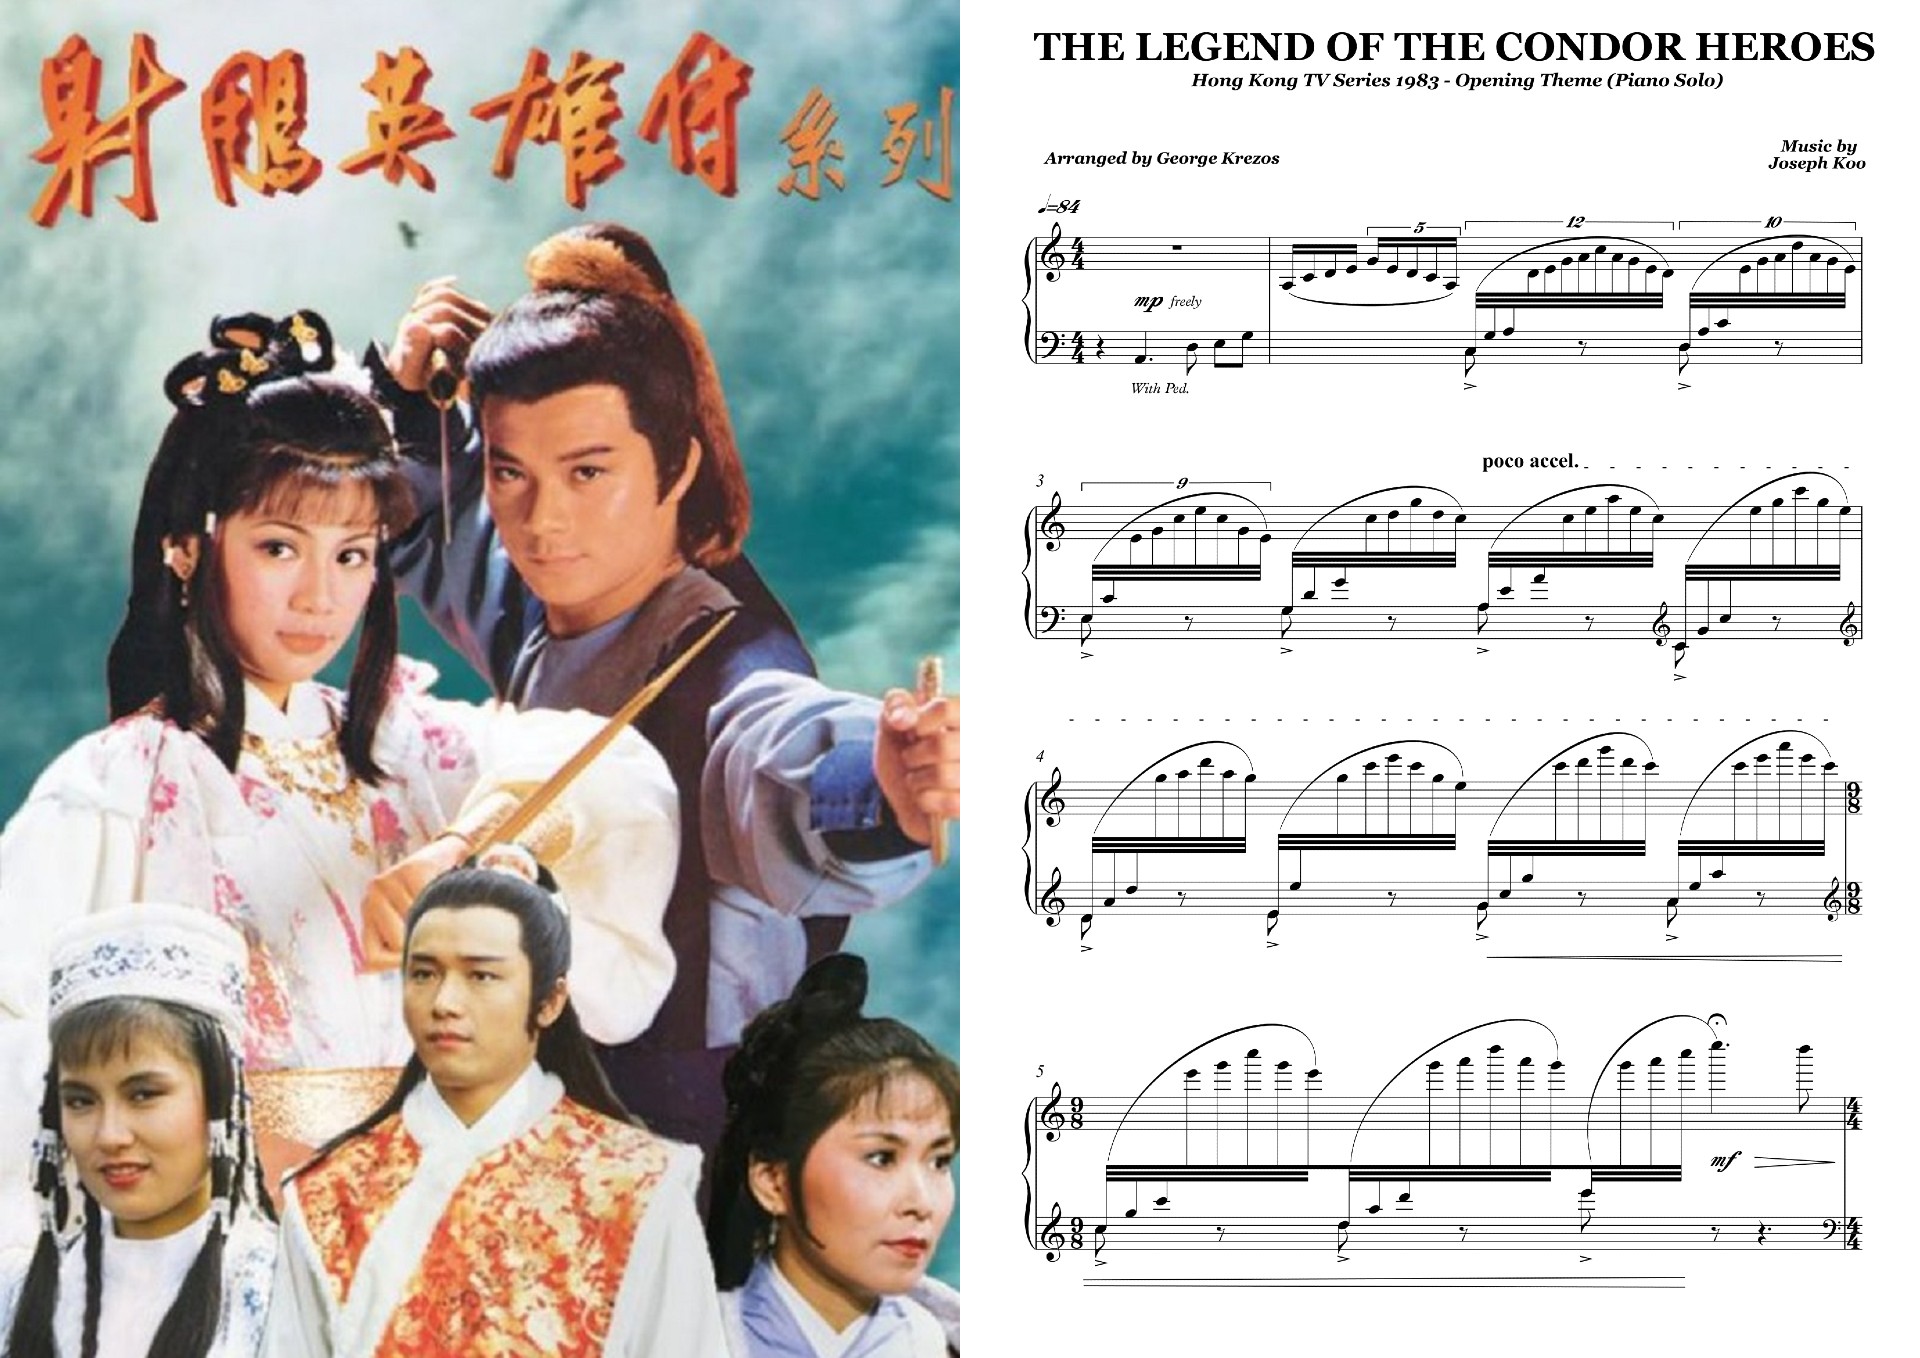 The Legend of the Condor Heroes - Opening Theme.jpg